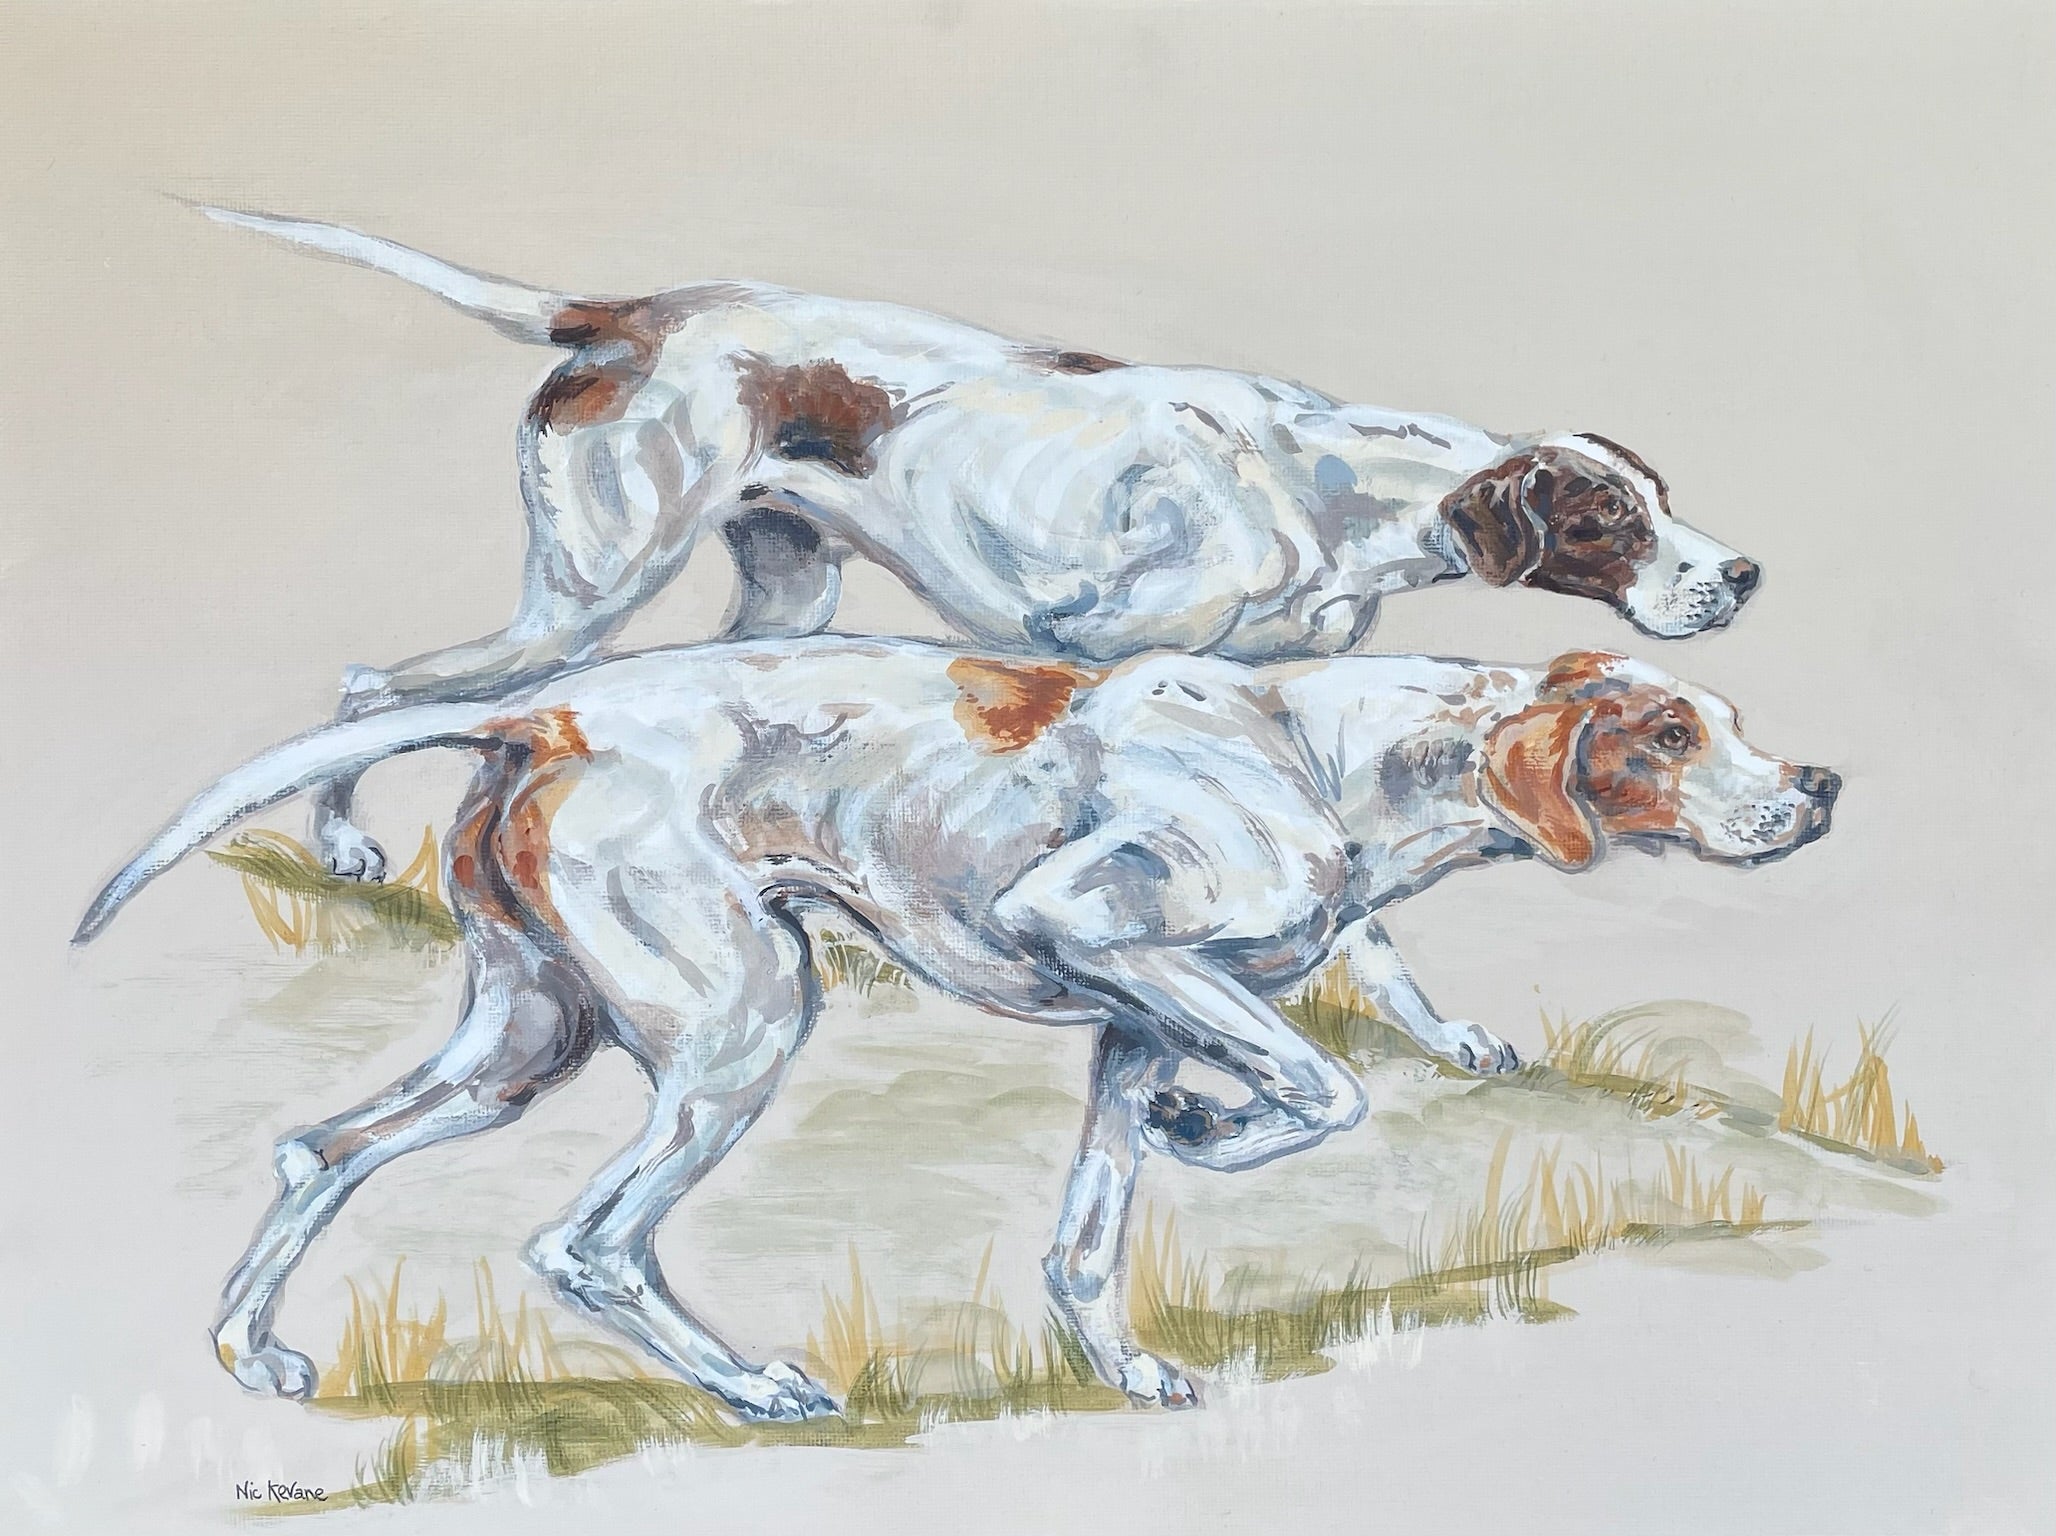 English Pointers -  two traditional gundogs hunting.  A painting of a working dog breed inspired by old country sporting prints.